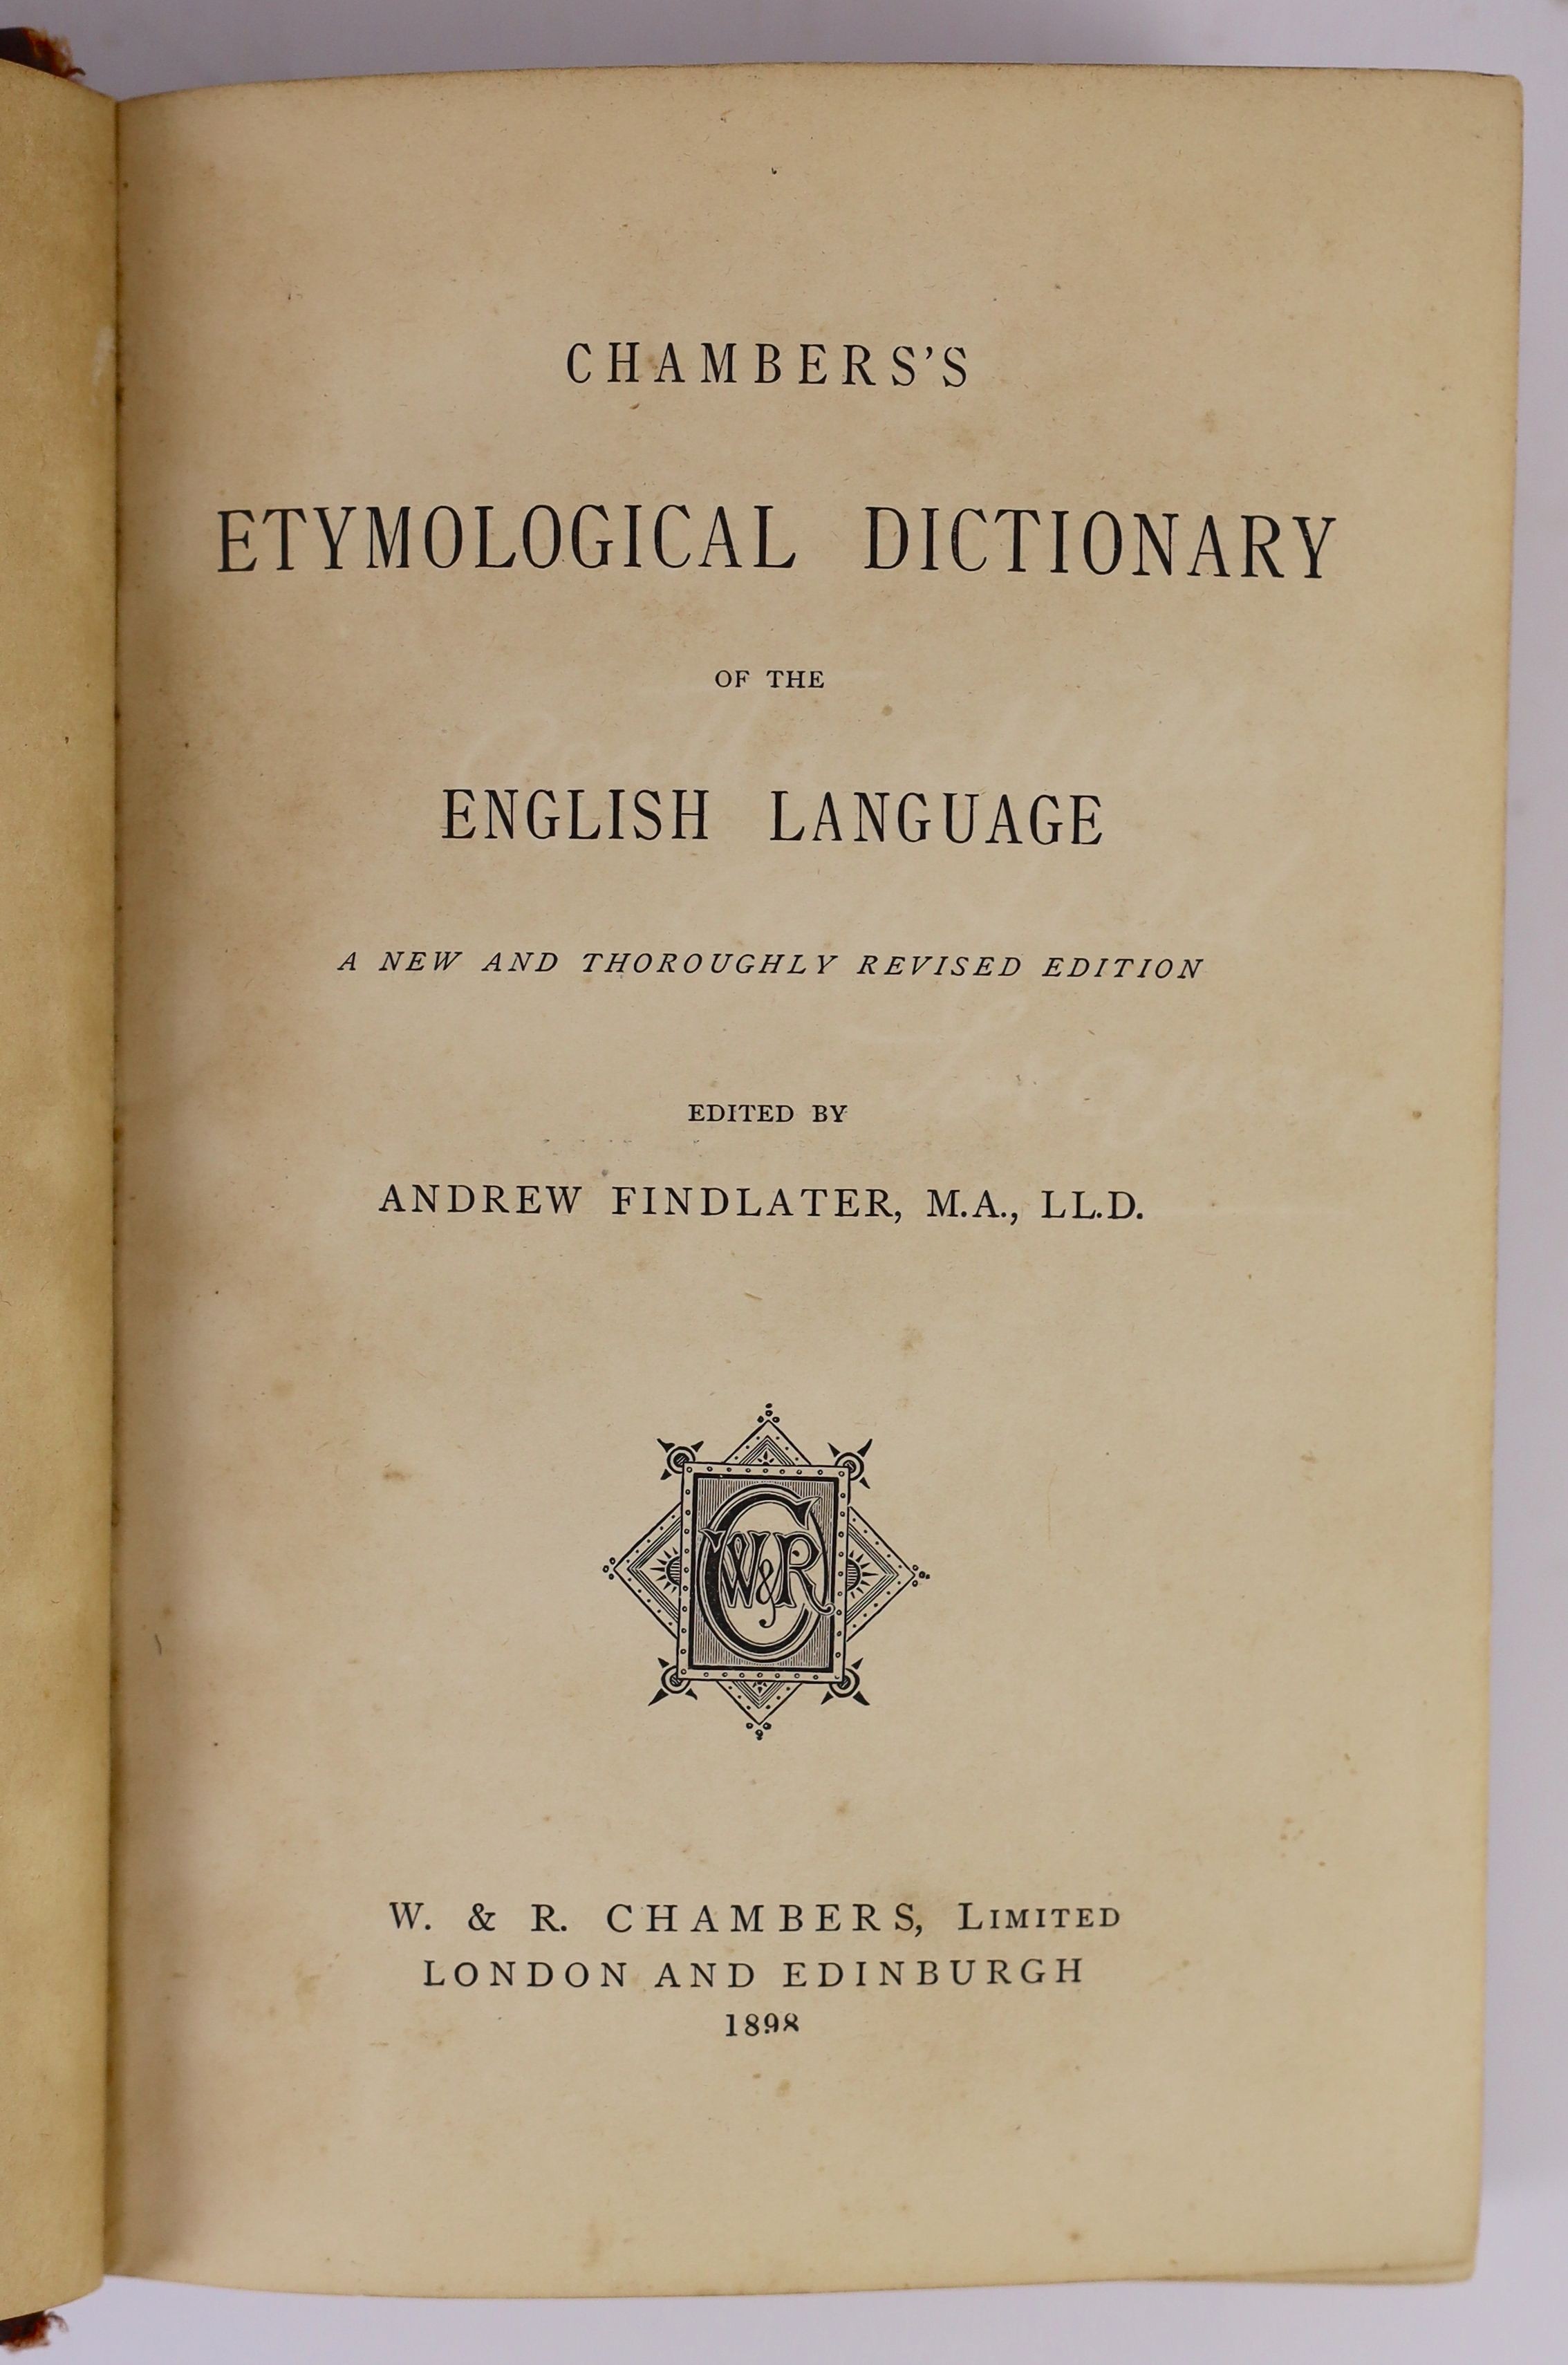 Chamber's Etymological Dictionary of The English Language